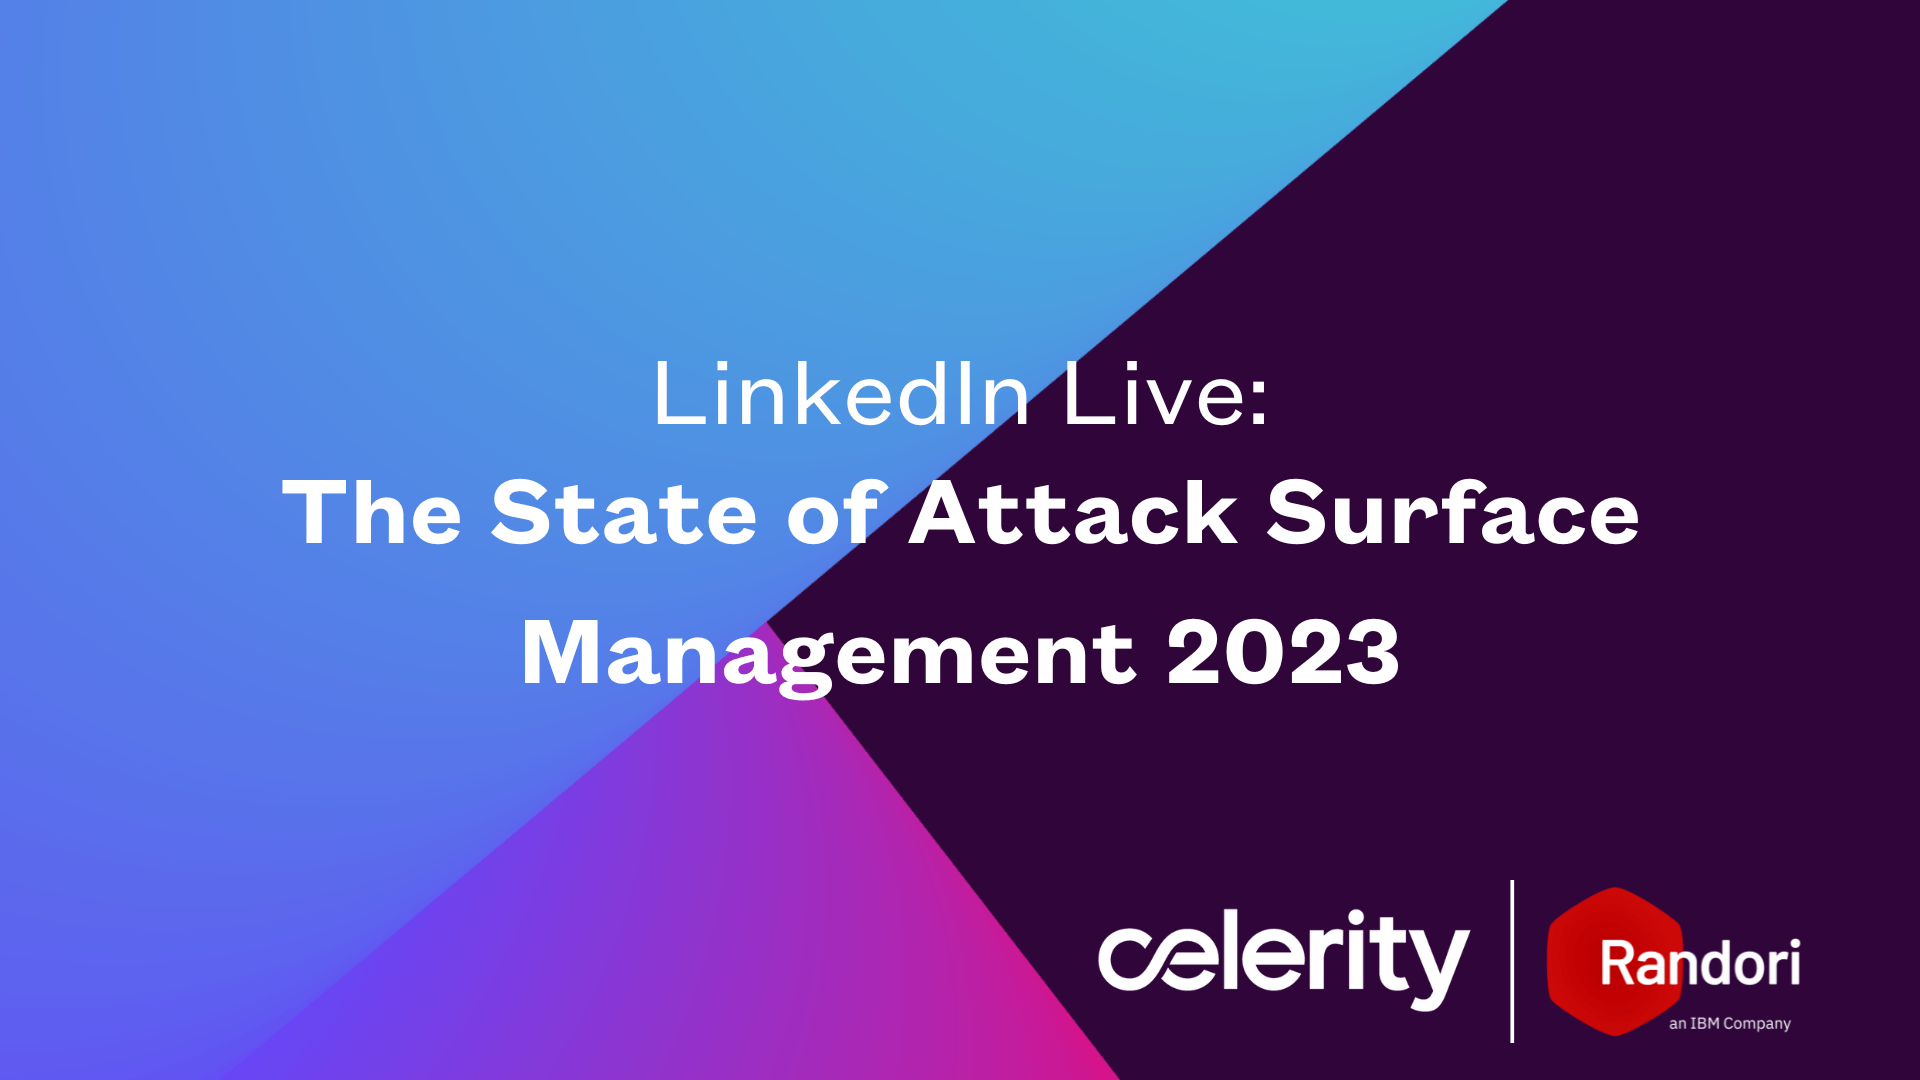 The State of Attack Surface Management 2023